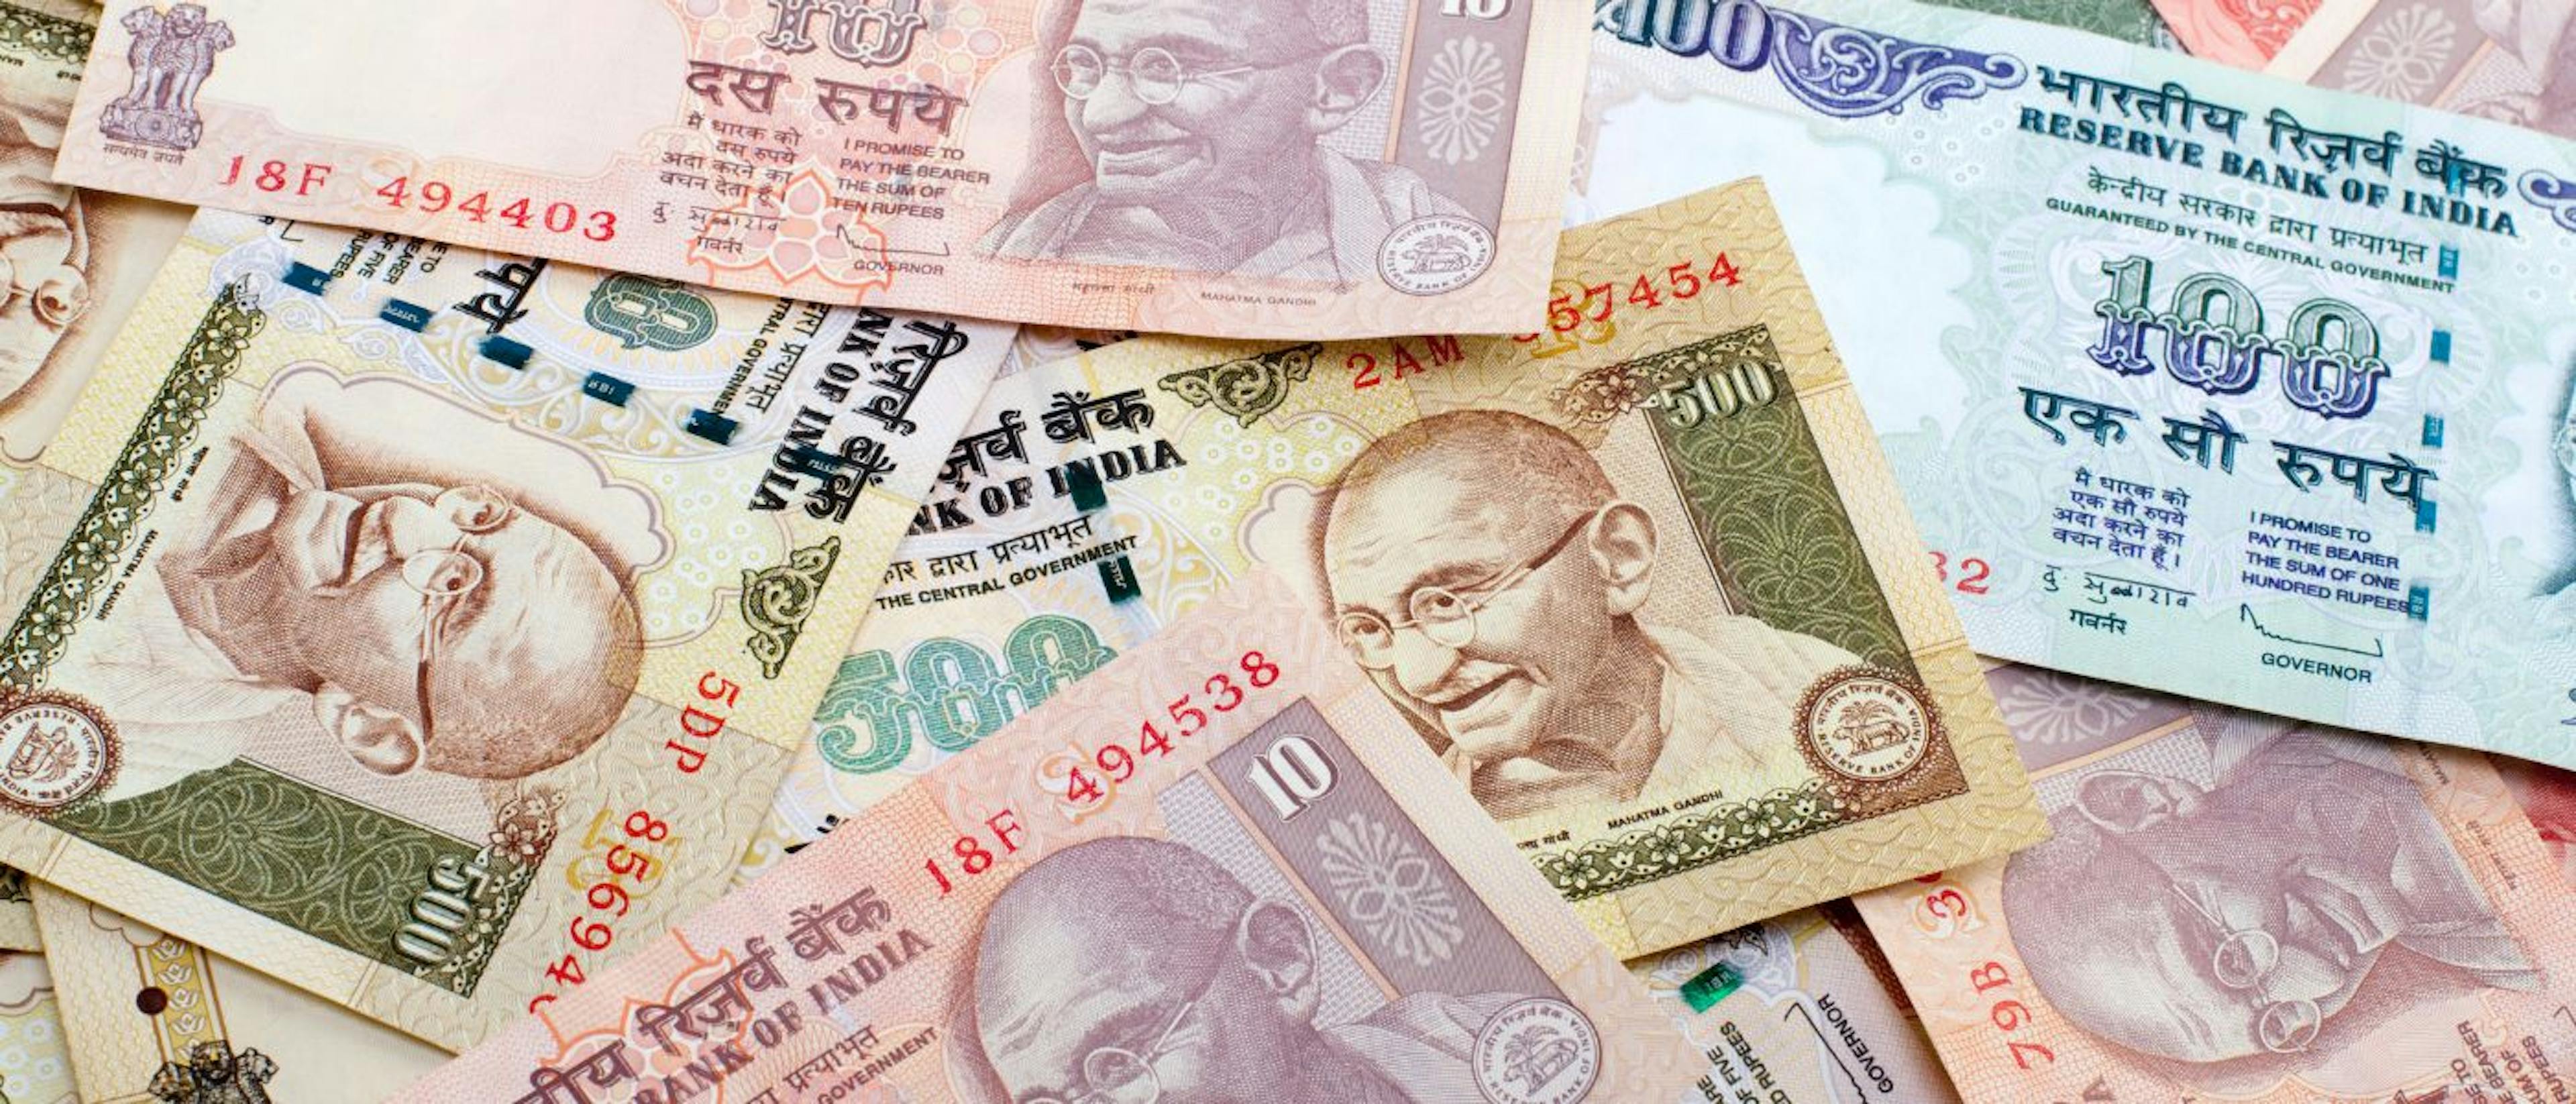 featured image - Indian Currency and Finance: CHAPTER III - Paper Currency